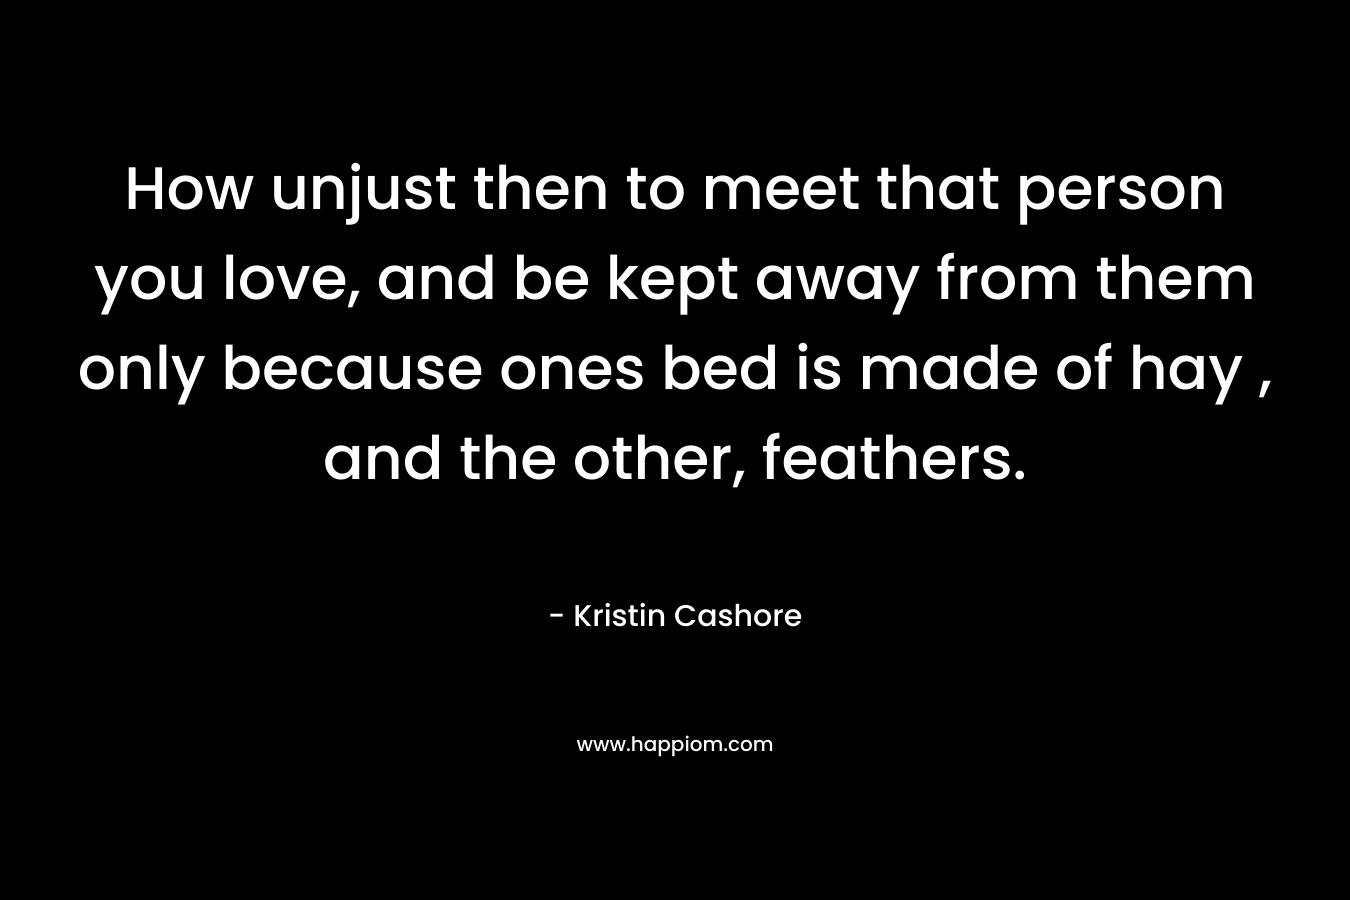 How unjust then to meet that person you love, and be kept away from them only because ones bed is made of hay , and the other, feathers. – Kristin Cashore